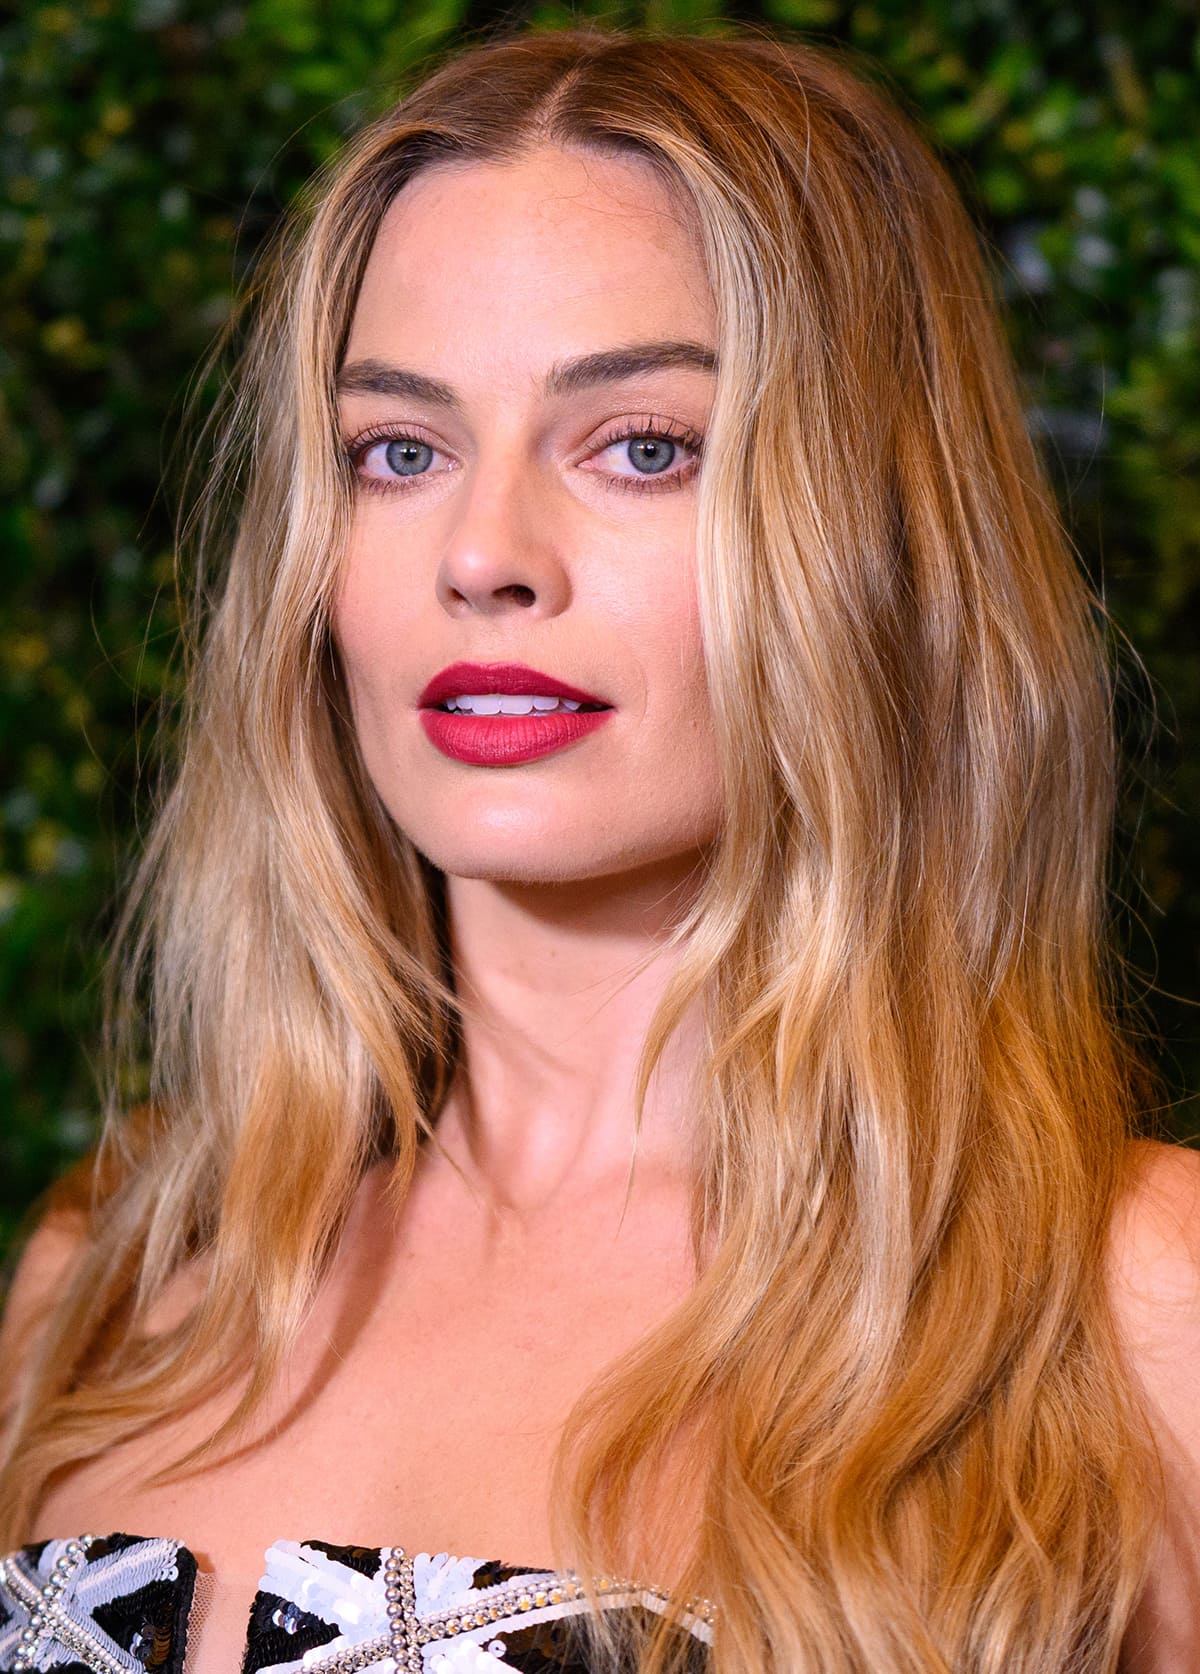 Margot Robbie styles her long blonde hair in sultry waves and wears hot pink lipstick